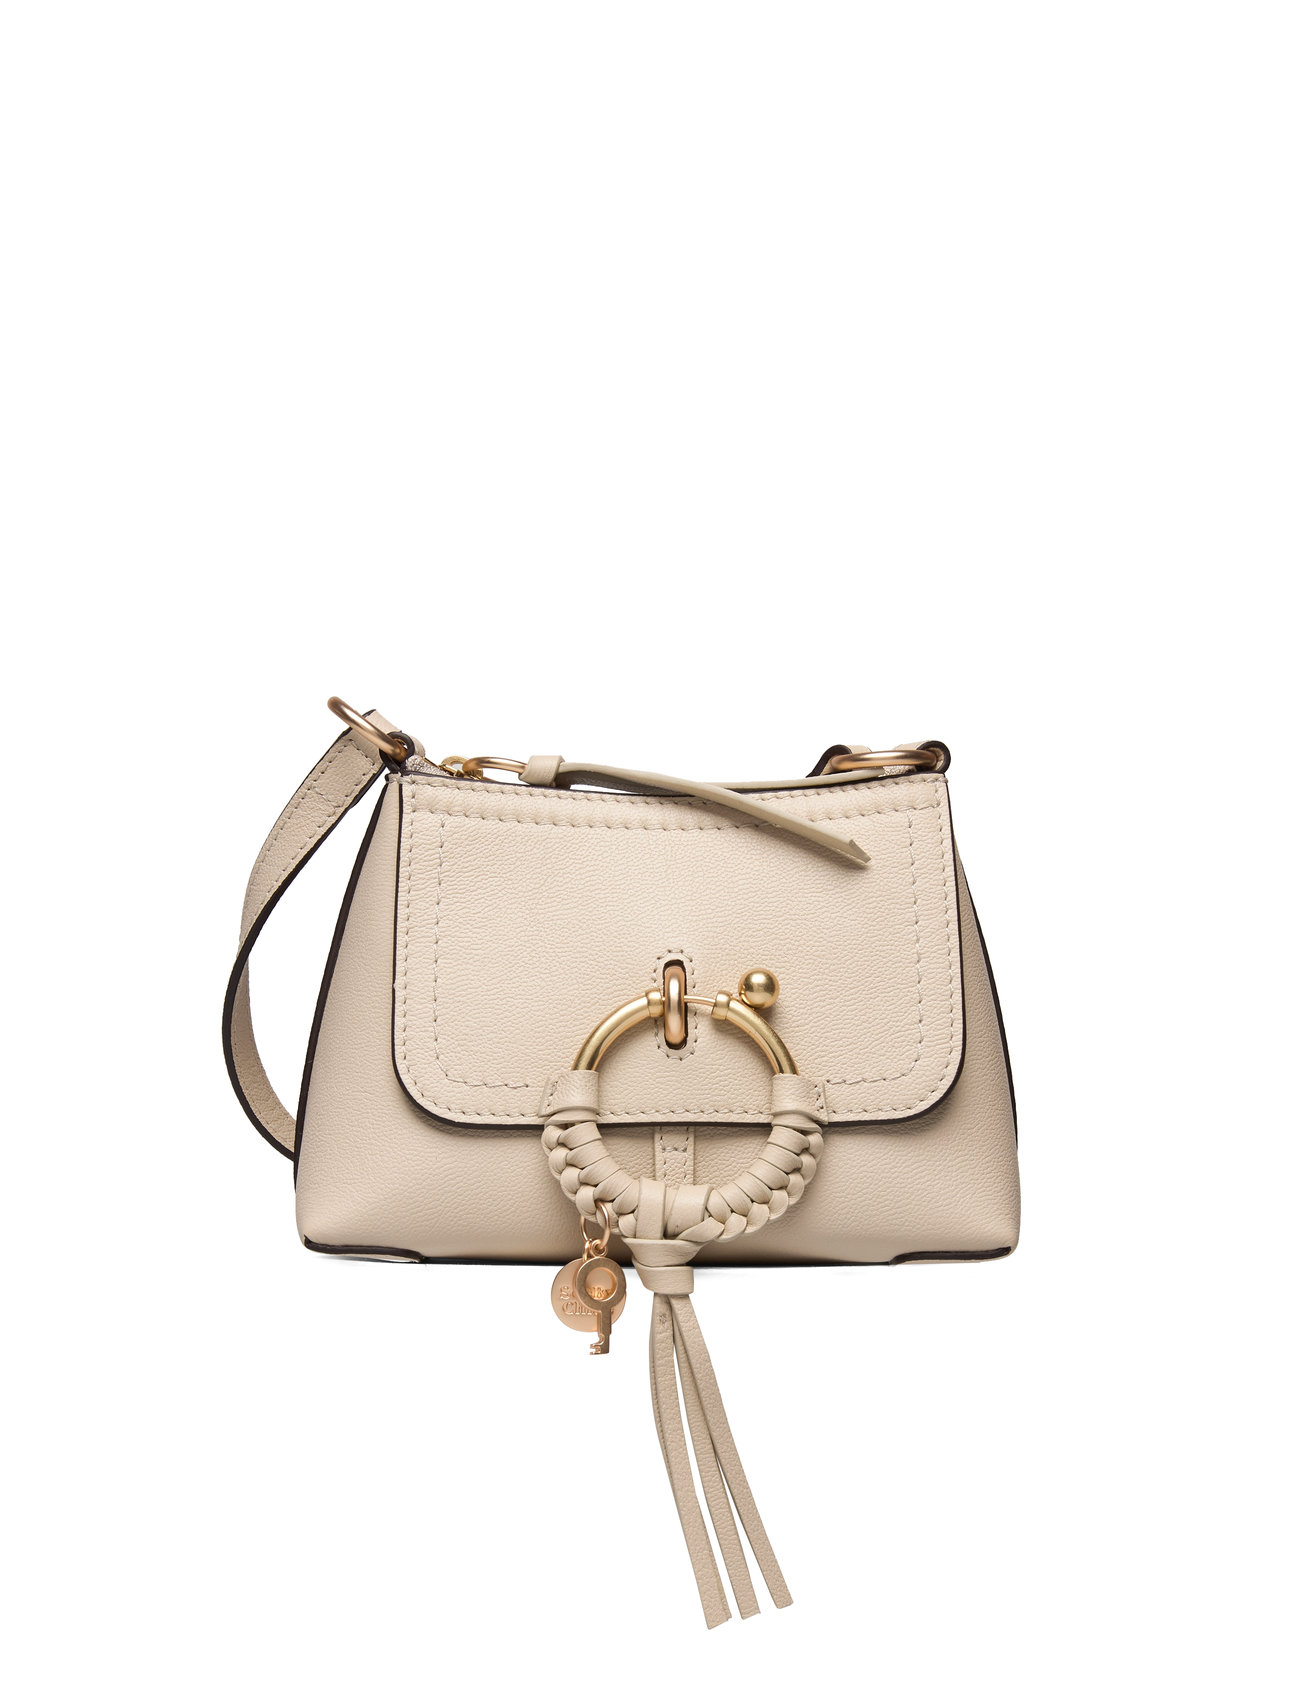 See by Chloé: Accessories for Women | Simons Canada